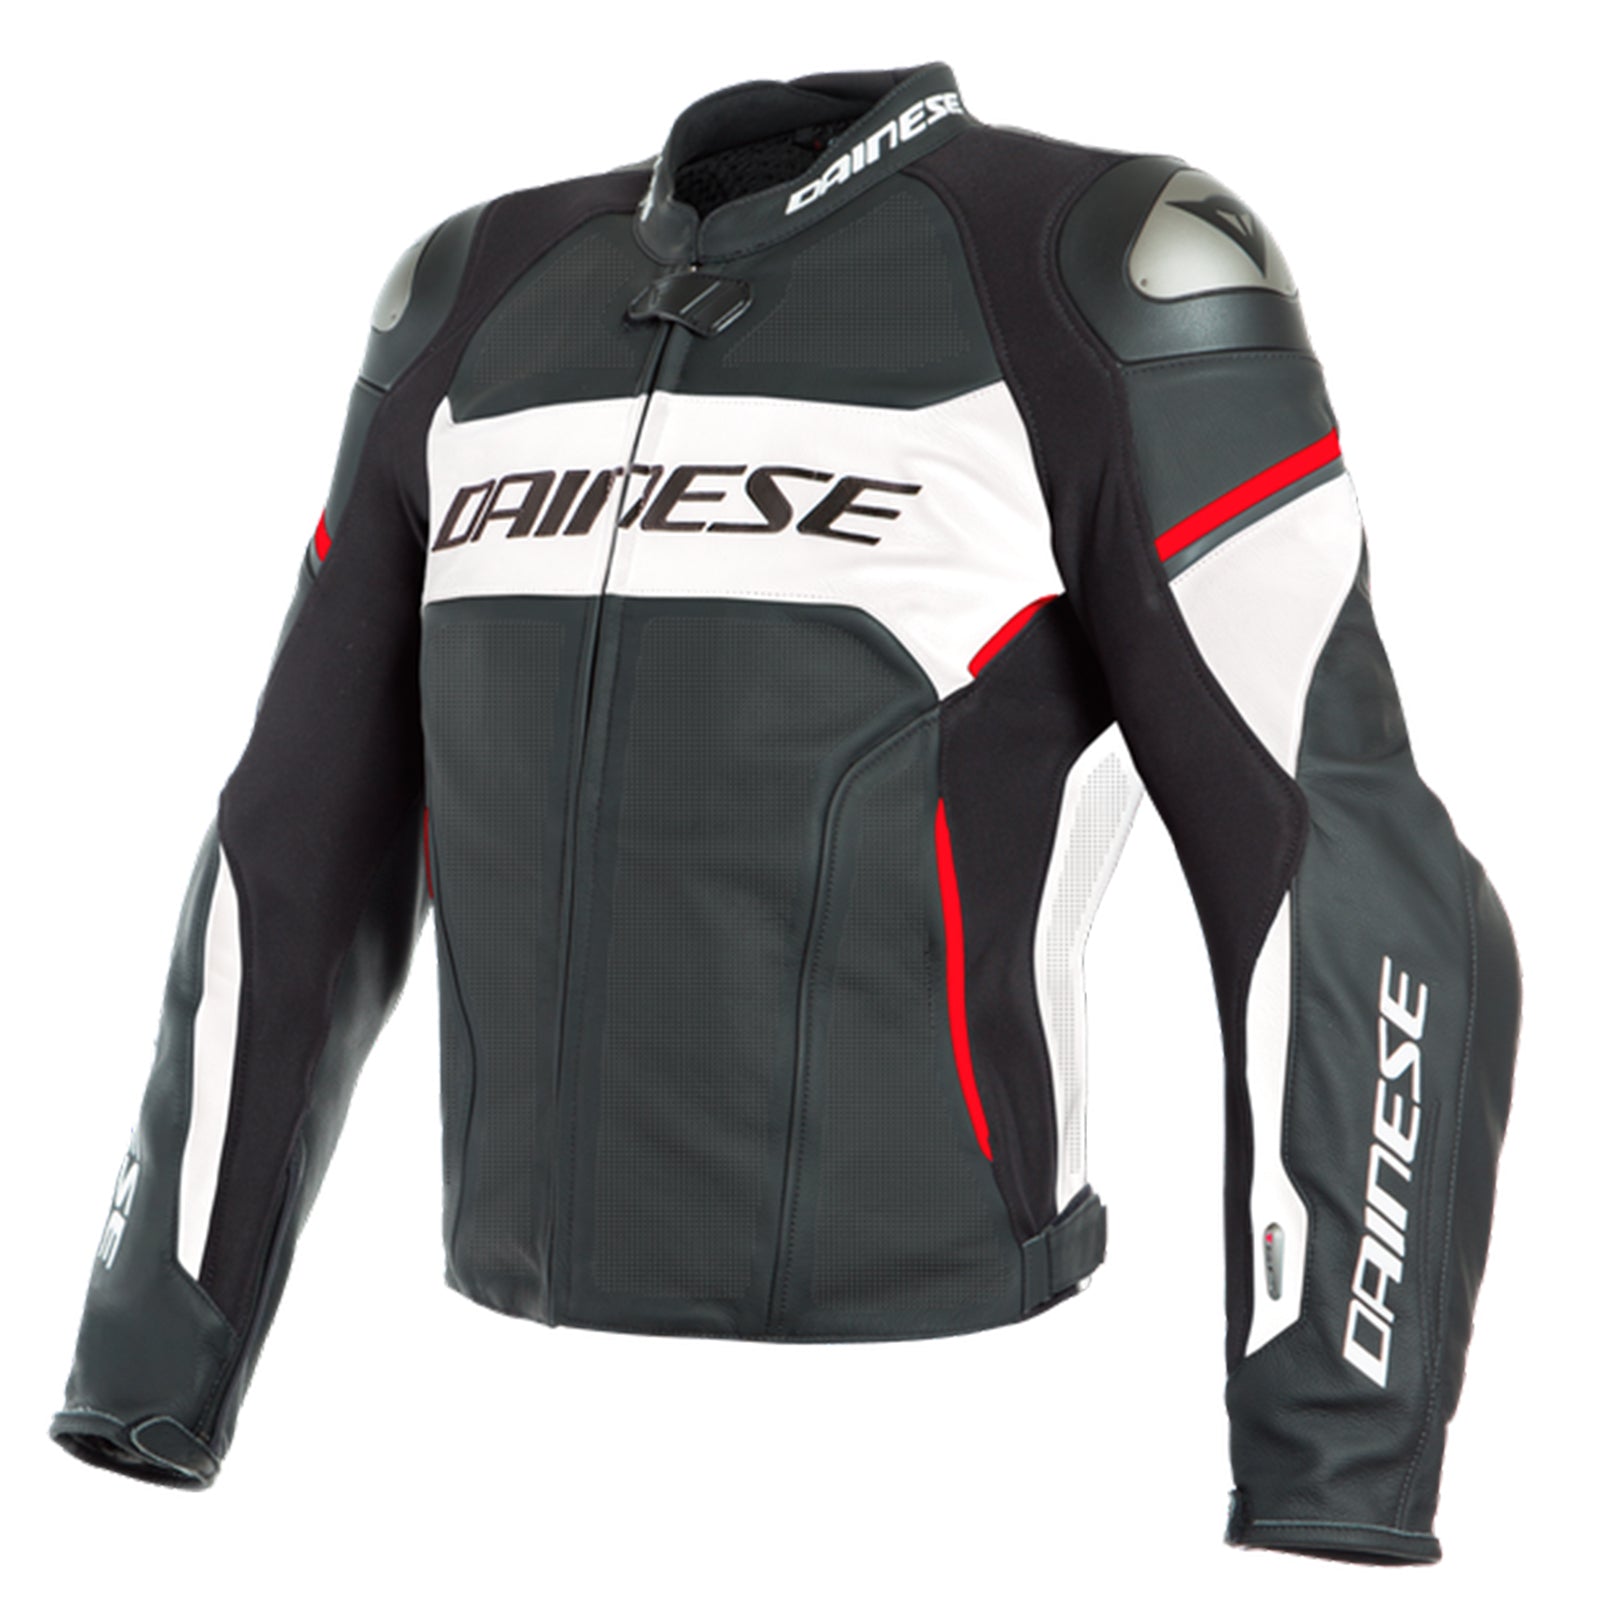 DAINESE RACING 3 D-AIR Perforated Jacket